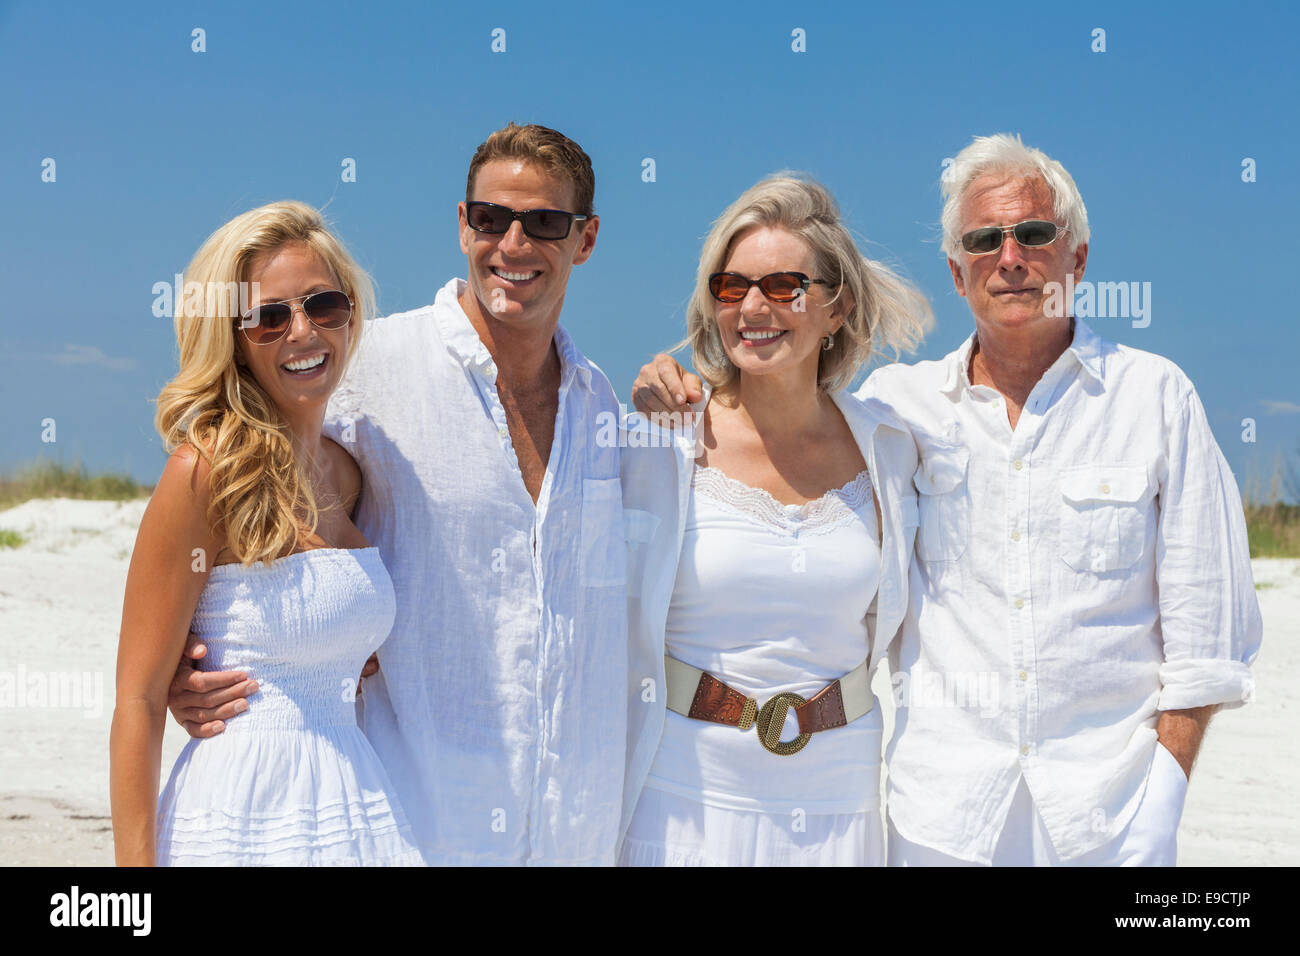 Four people, two seniors, couples or family generations, wearing white clothes together having fun on tropical beach vacation Stock Photo